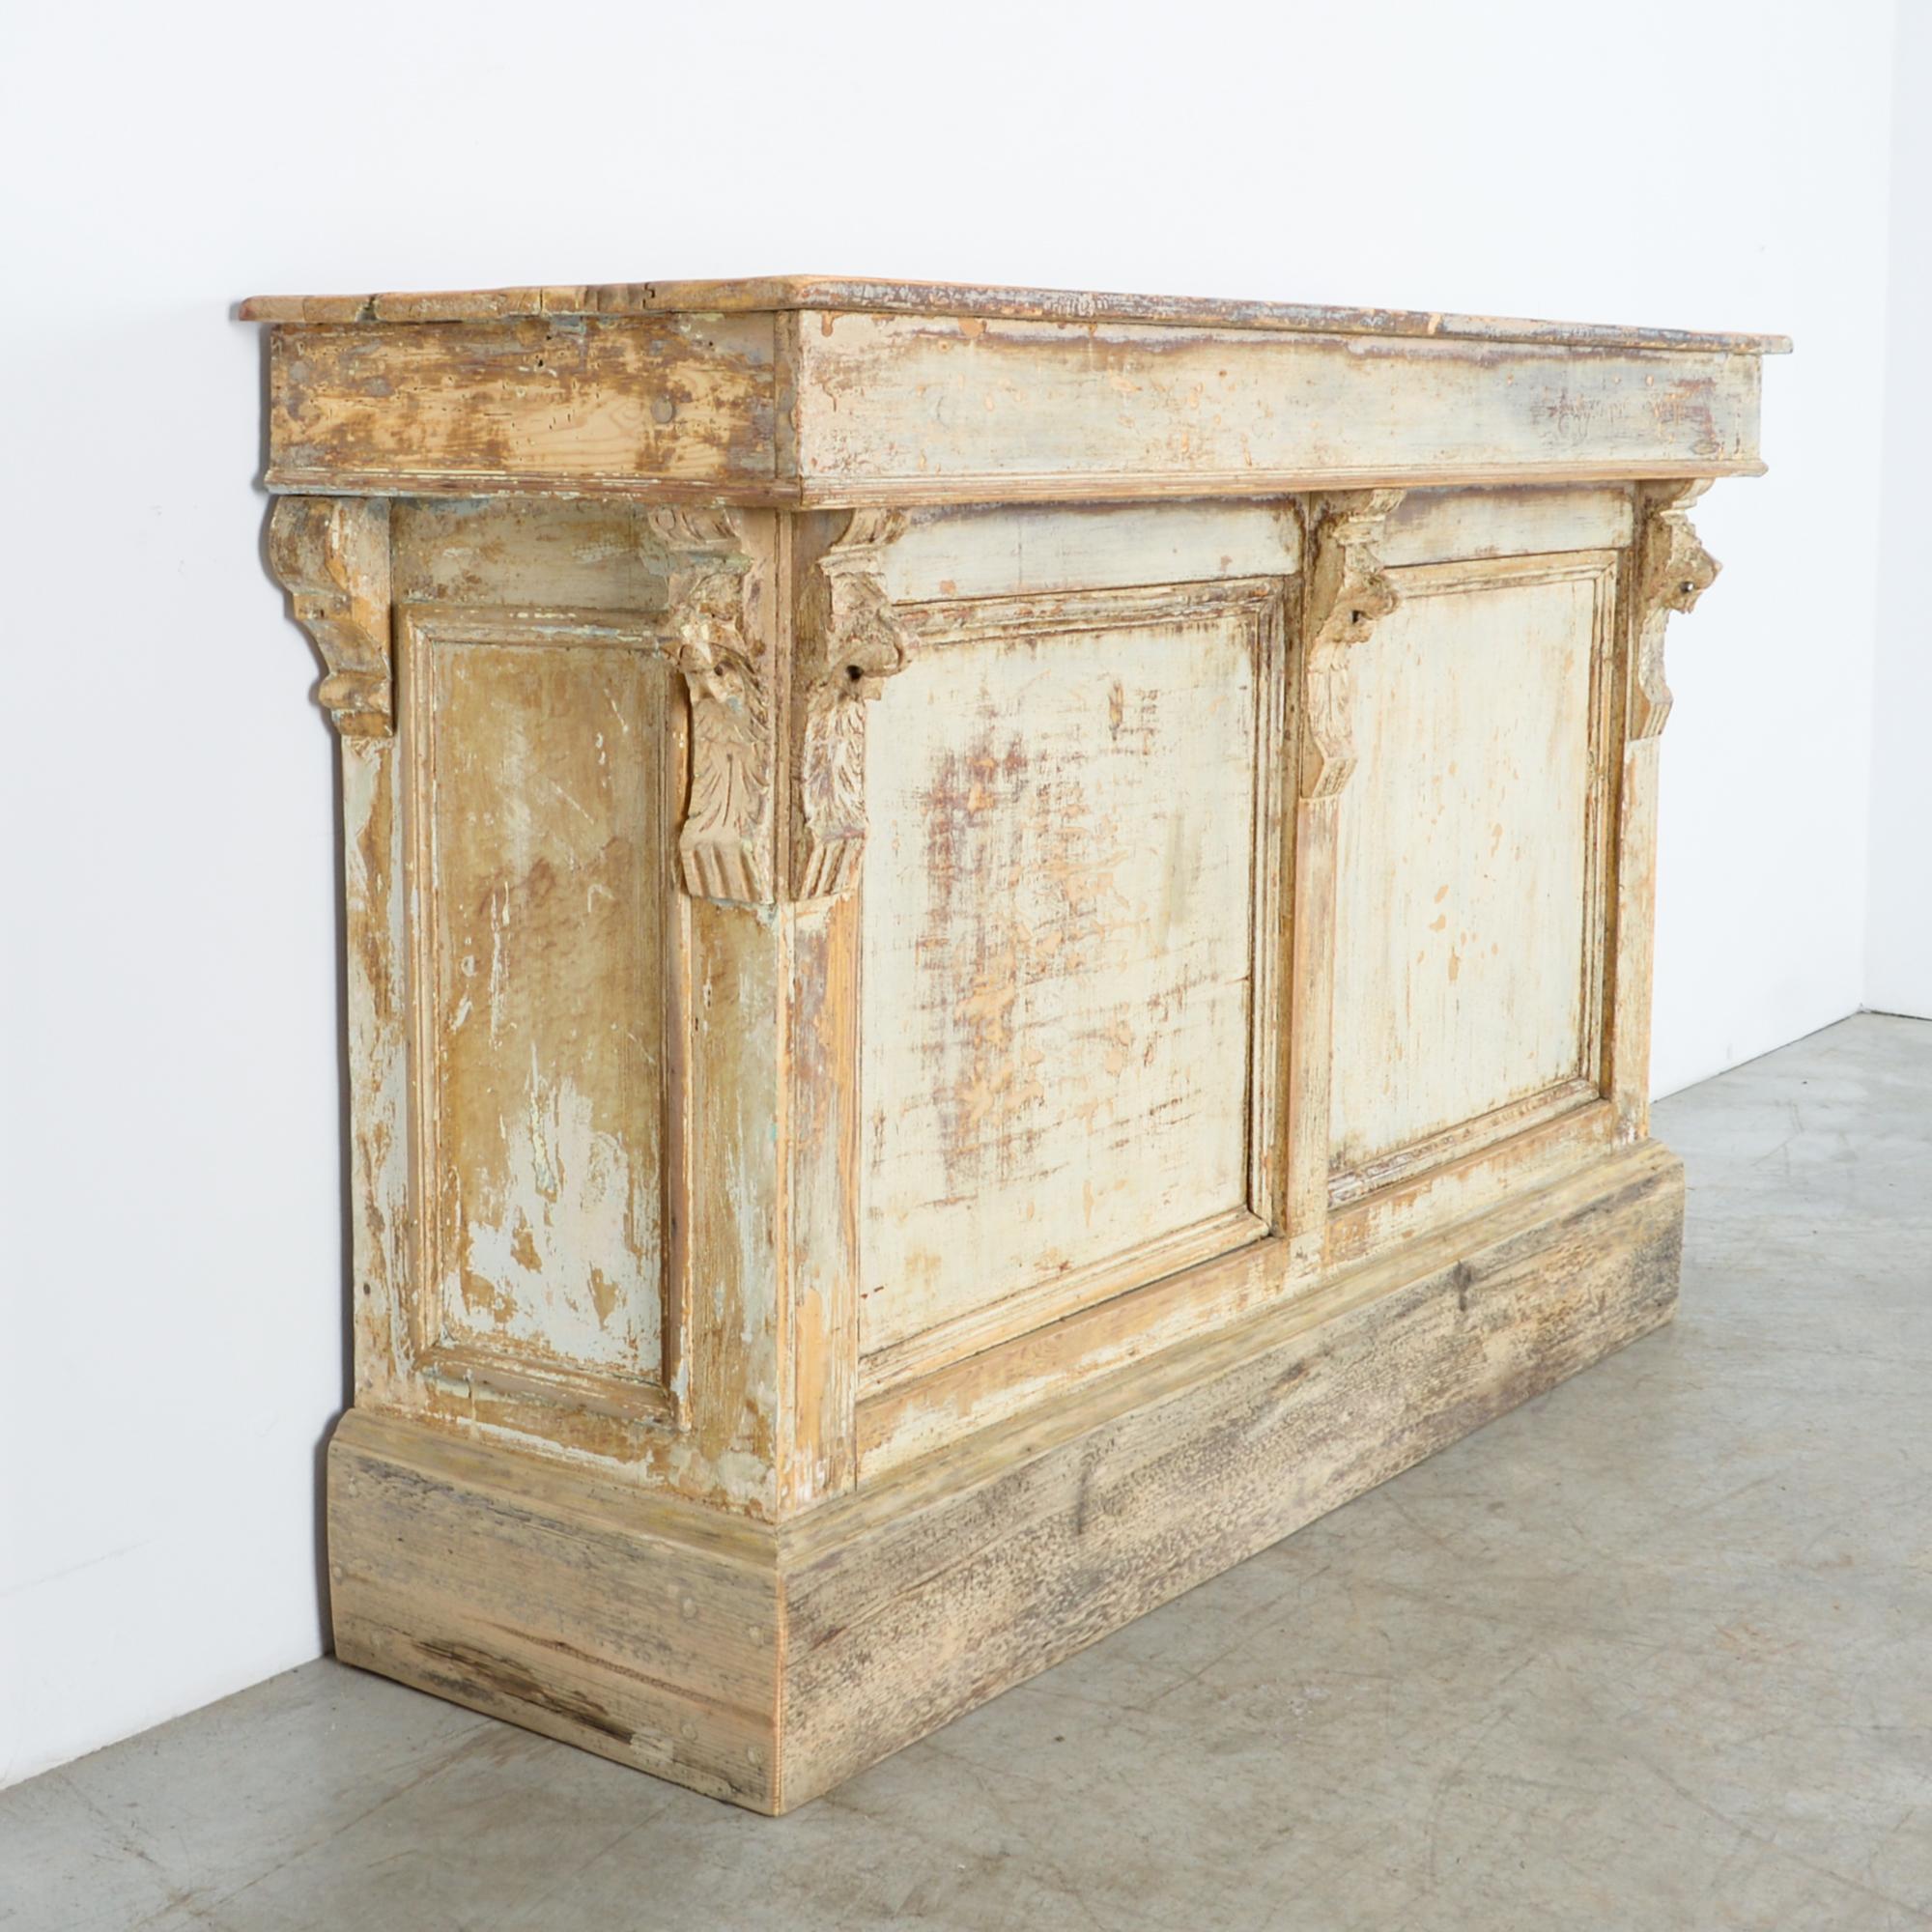 From Paris, circa 1880, this neoclassical store counter reflects the era of eclectic French interior design of the highest level. A simple bar counter is elevated with lion’s head corbel motif, and thick proportions, cloaked in a striking patina.